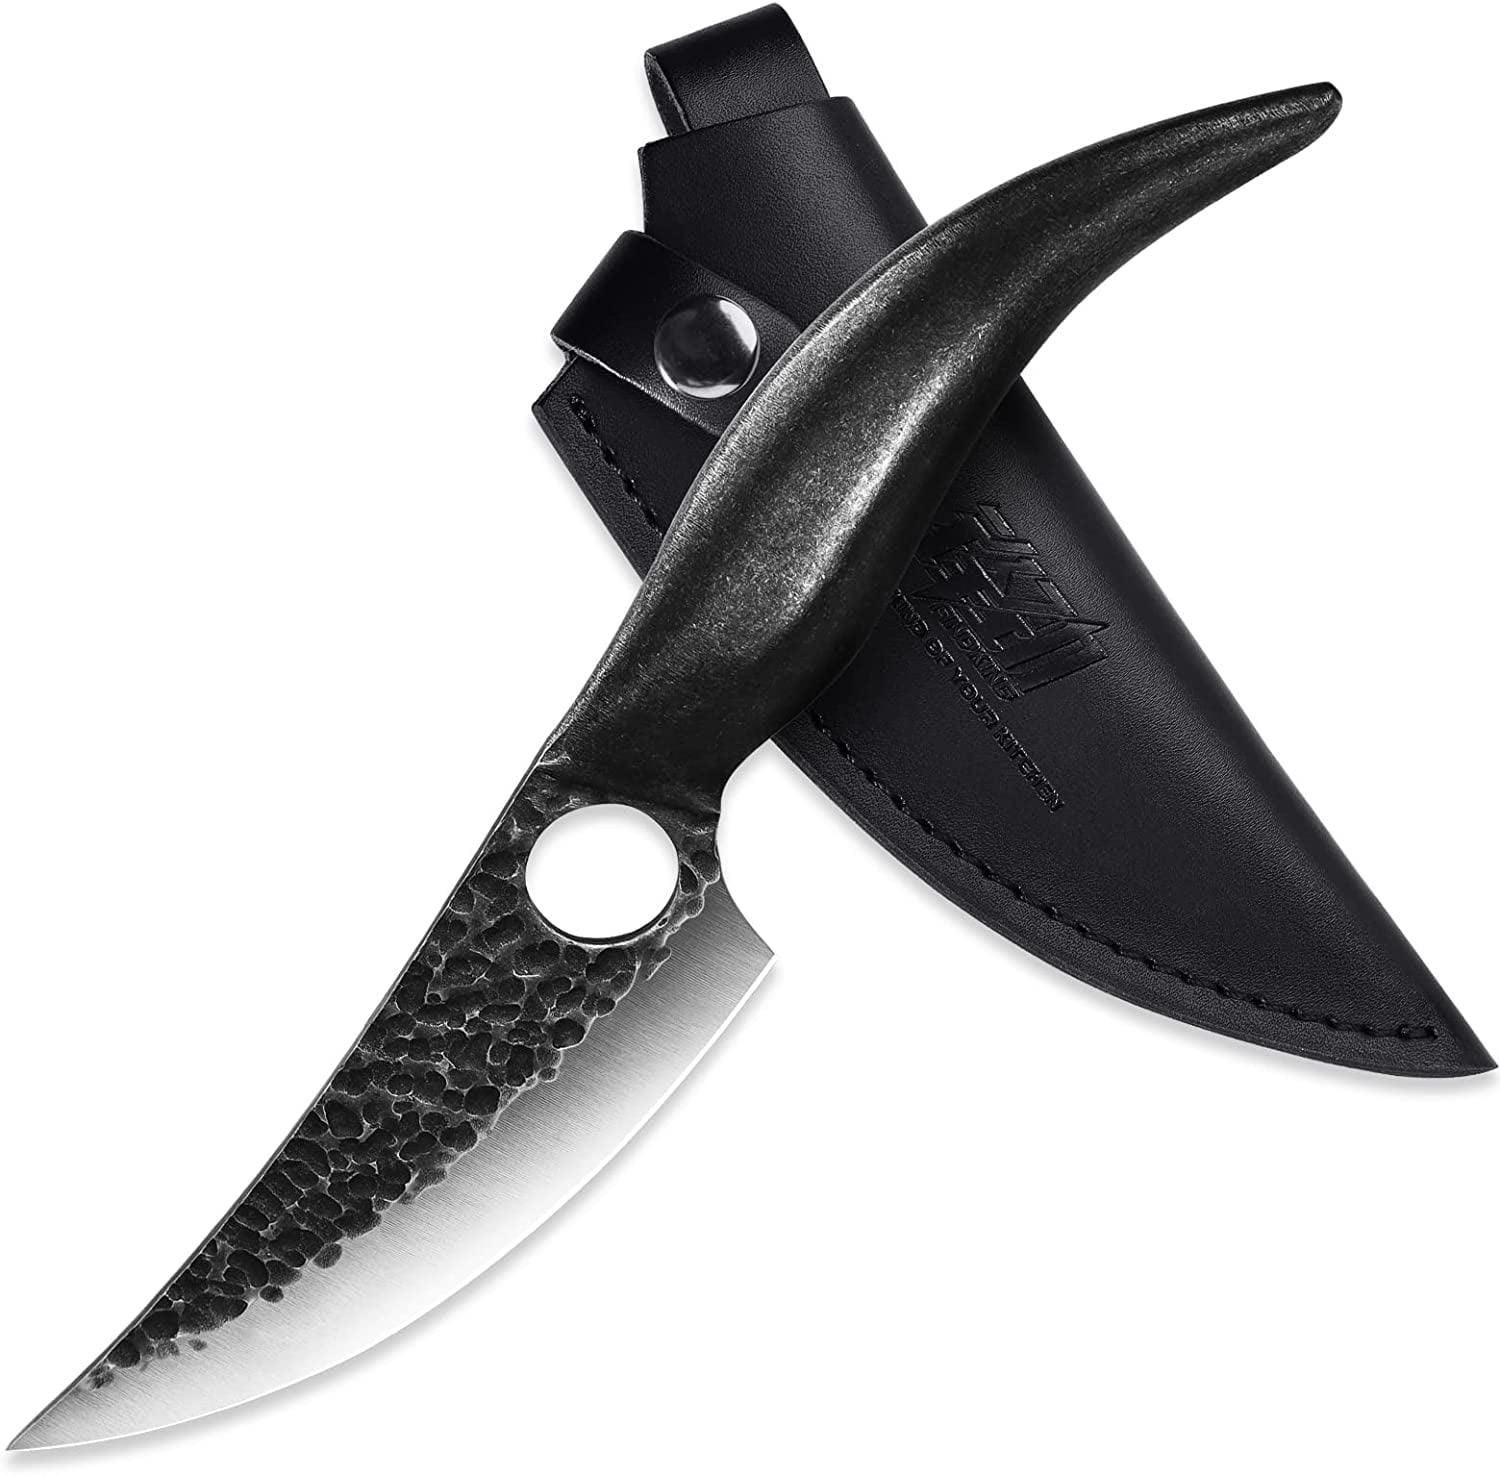 FINDKING Moon Series Boning Knife with Leather Sheath, Multipurpose Meat 5Cr15 Stainless Blade, 304 Steel Handle, for Home, Kitchen, Outdoor, Camping, BBQ, 5.8 Inch, Black - Walmart.com